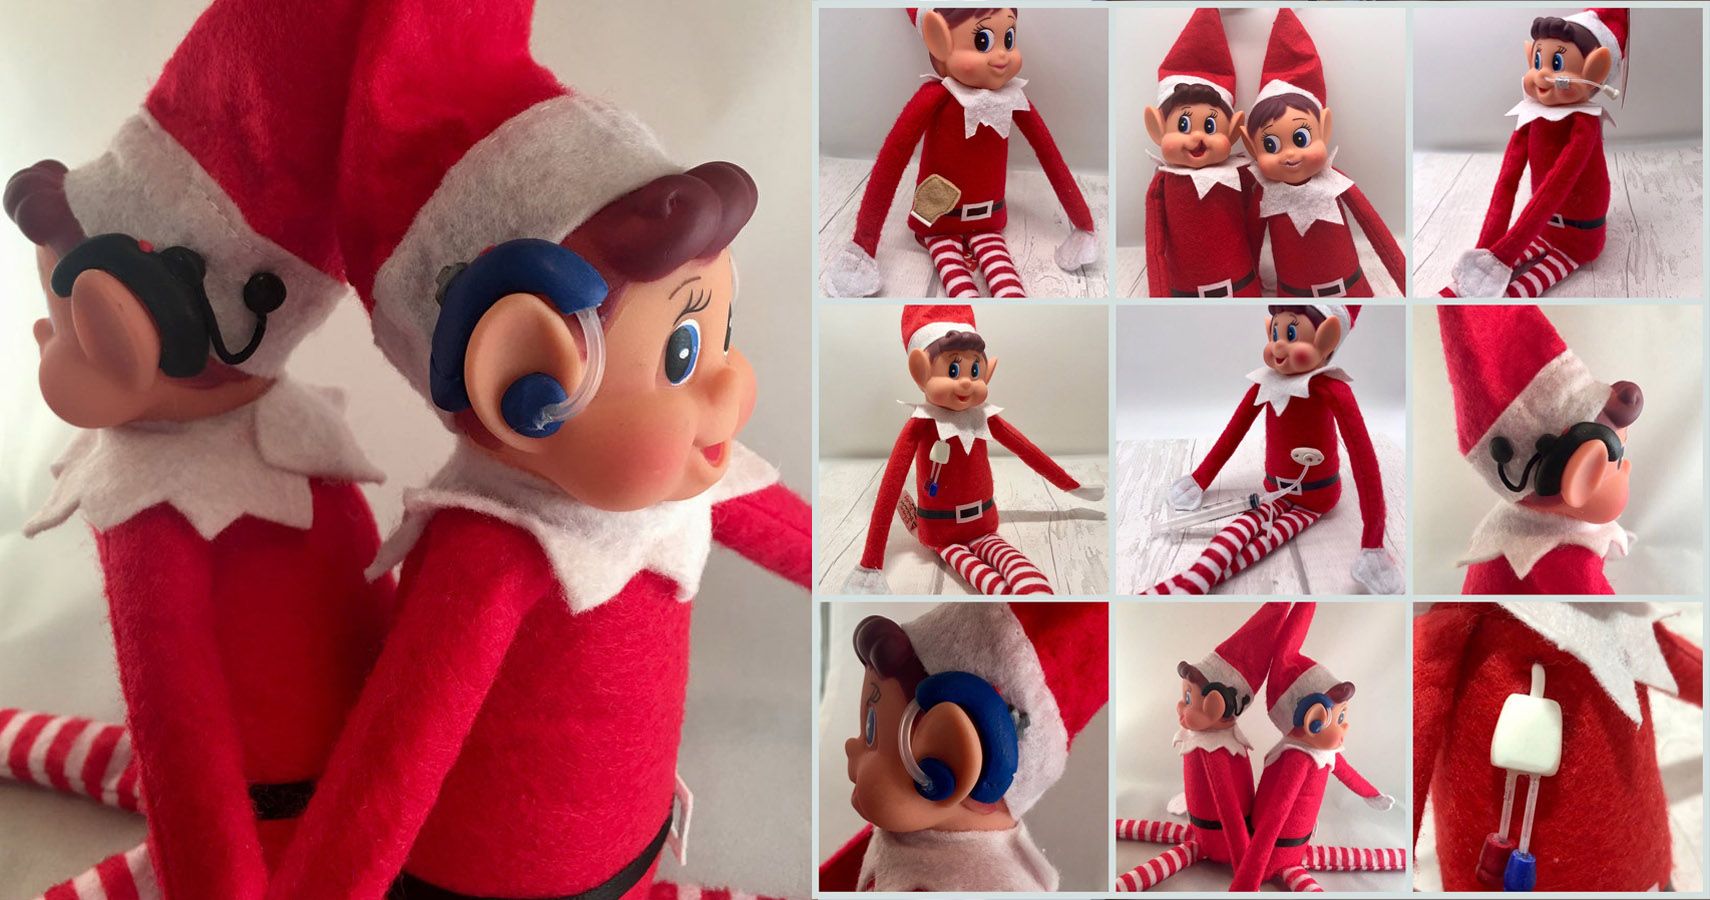 Mom Modifies Christmas Elf Dolls For Children With Disabilities